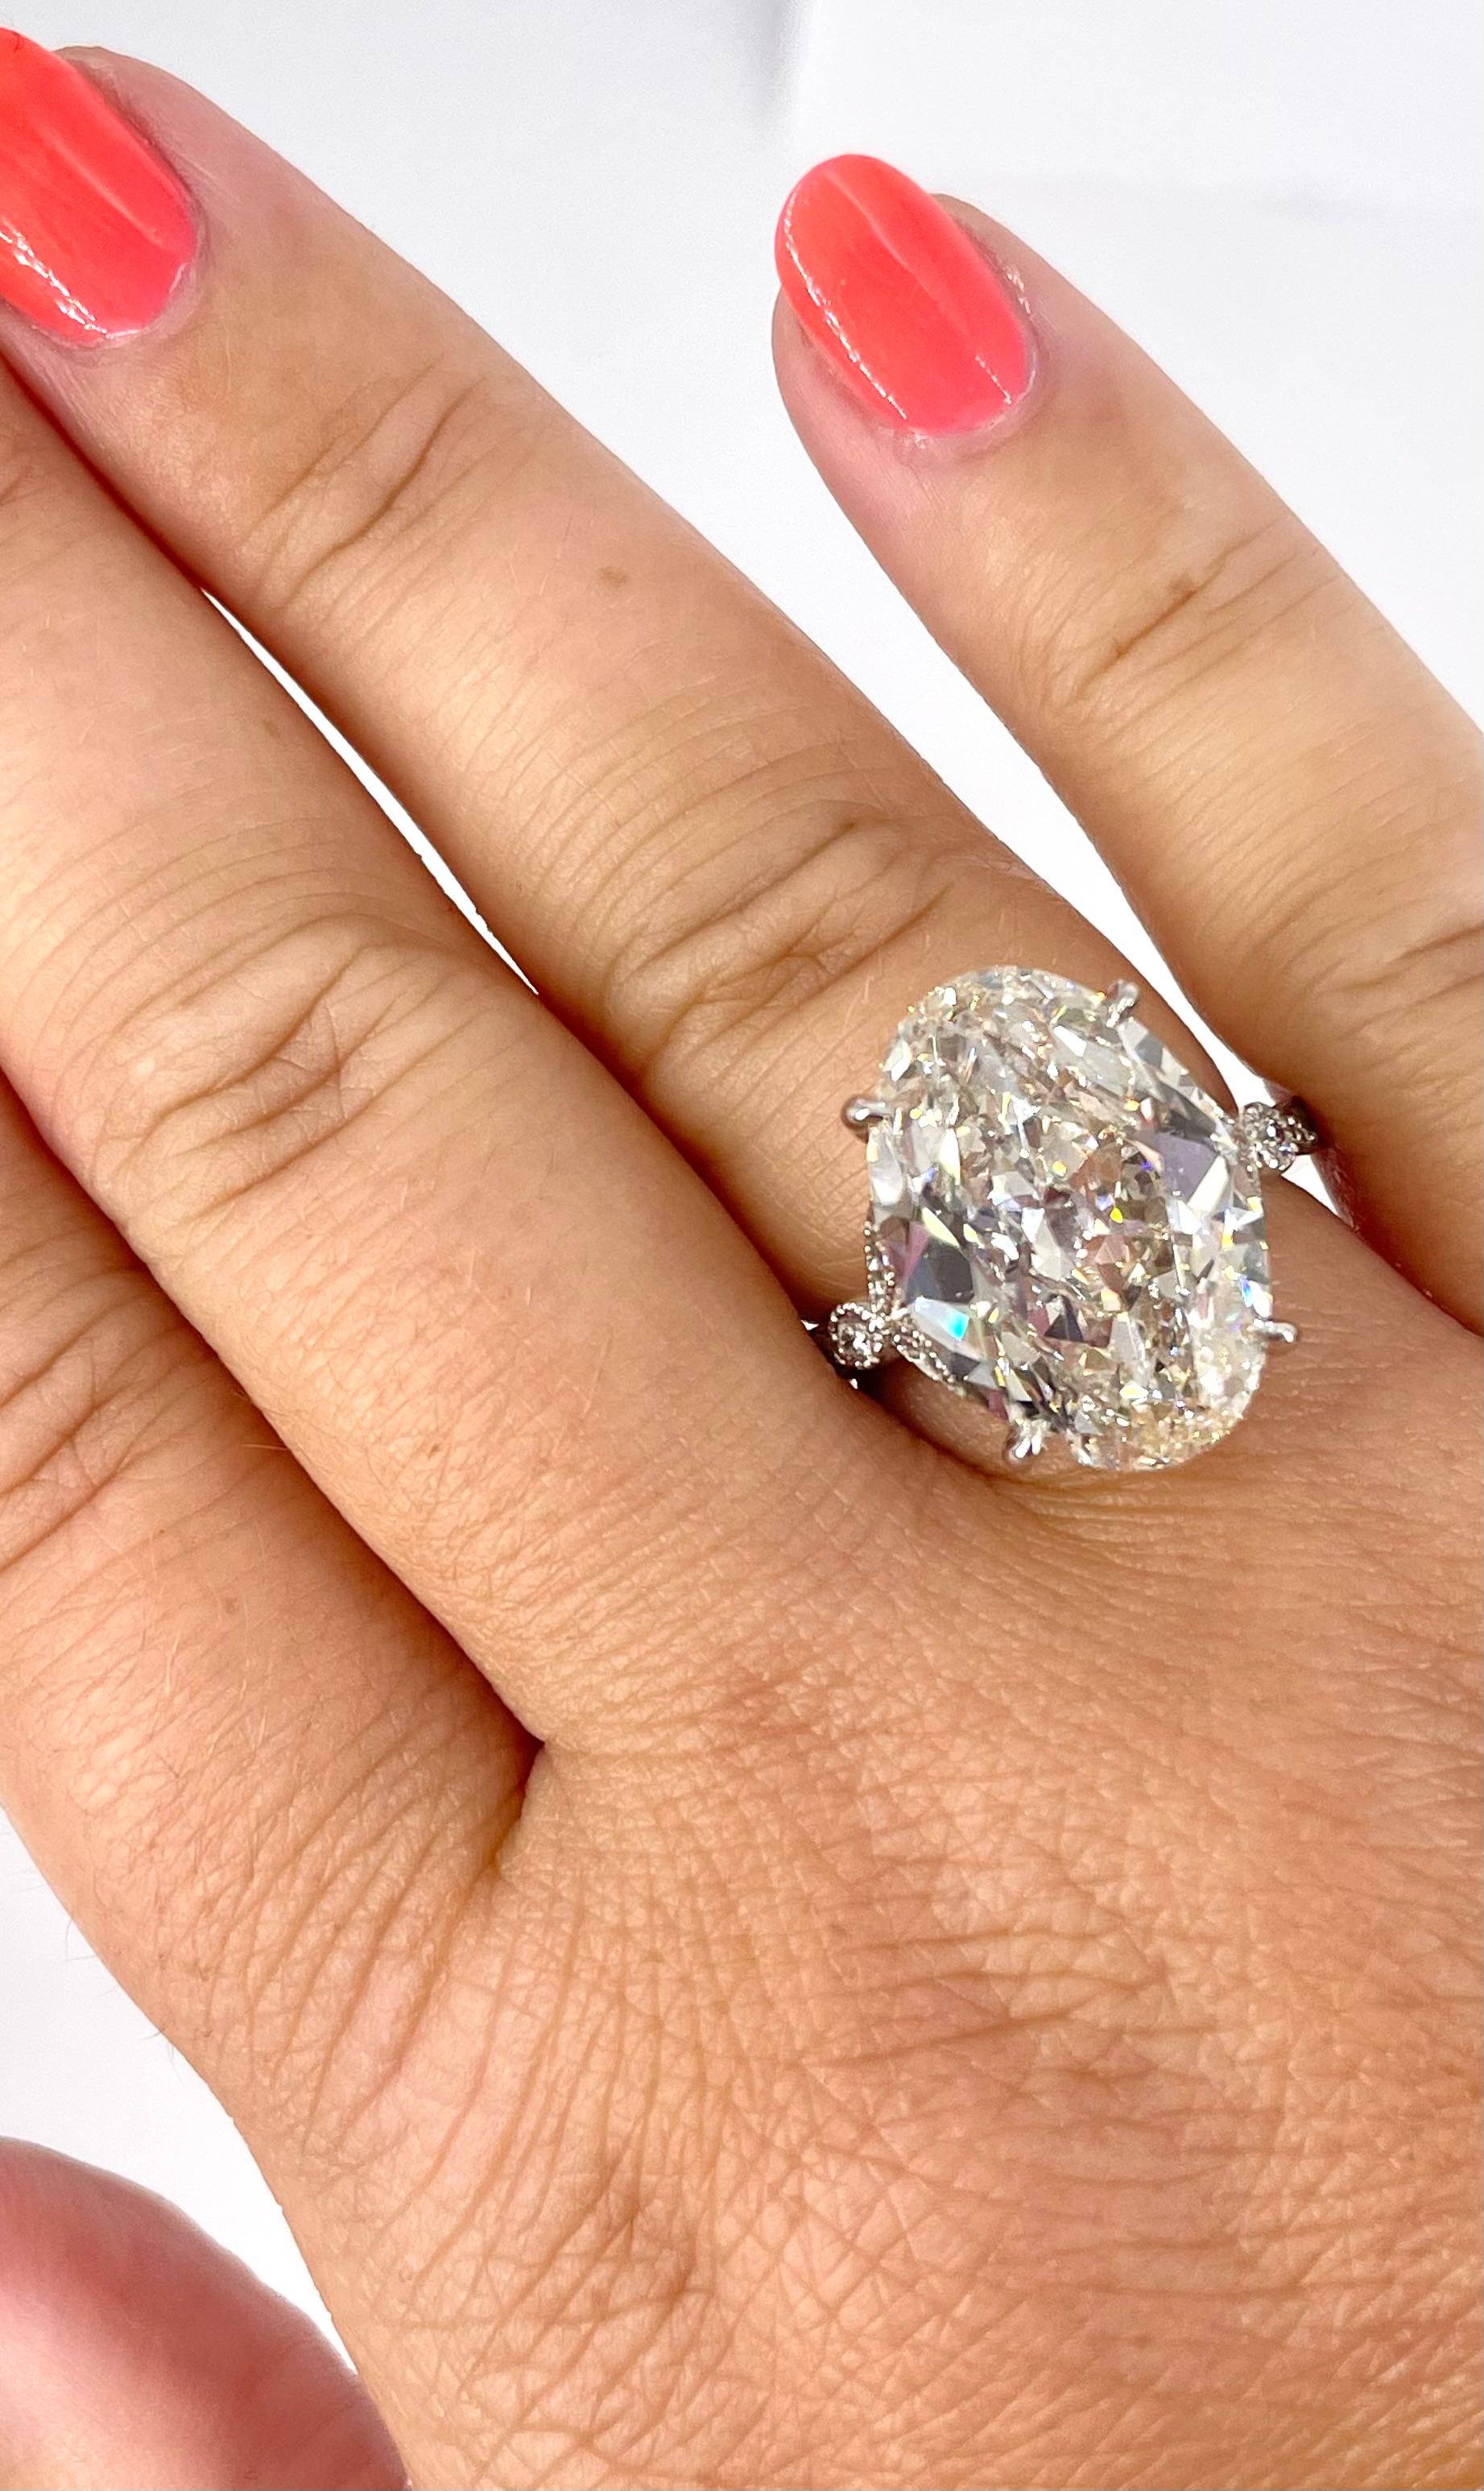 This romantic, antique inspired engagement ring by J. Birnbach features a gorgeous 8.56 carat oval diamond. The center diamond is GIA certified as J color and SI1 clarity. The platinum setting features milgrain and pave details create a feminine,